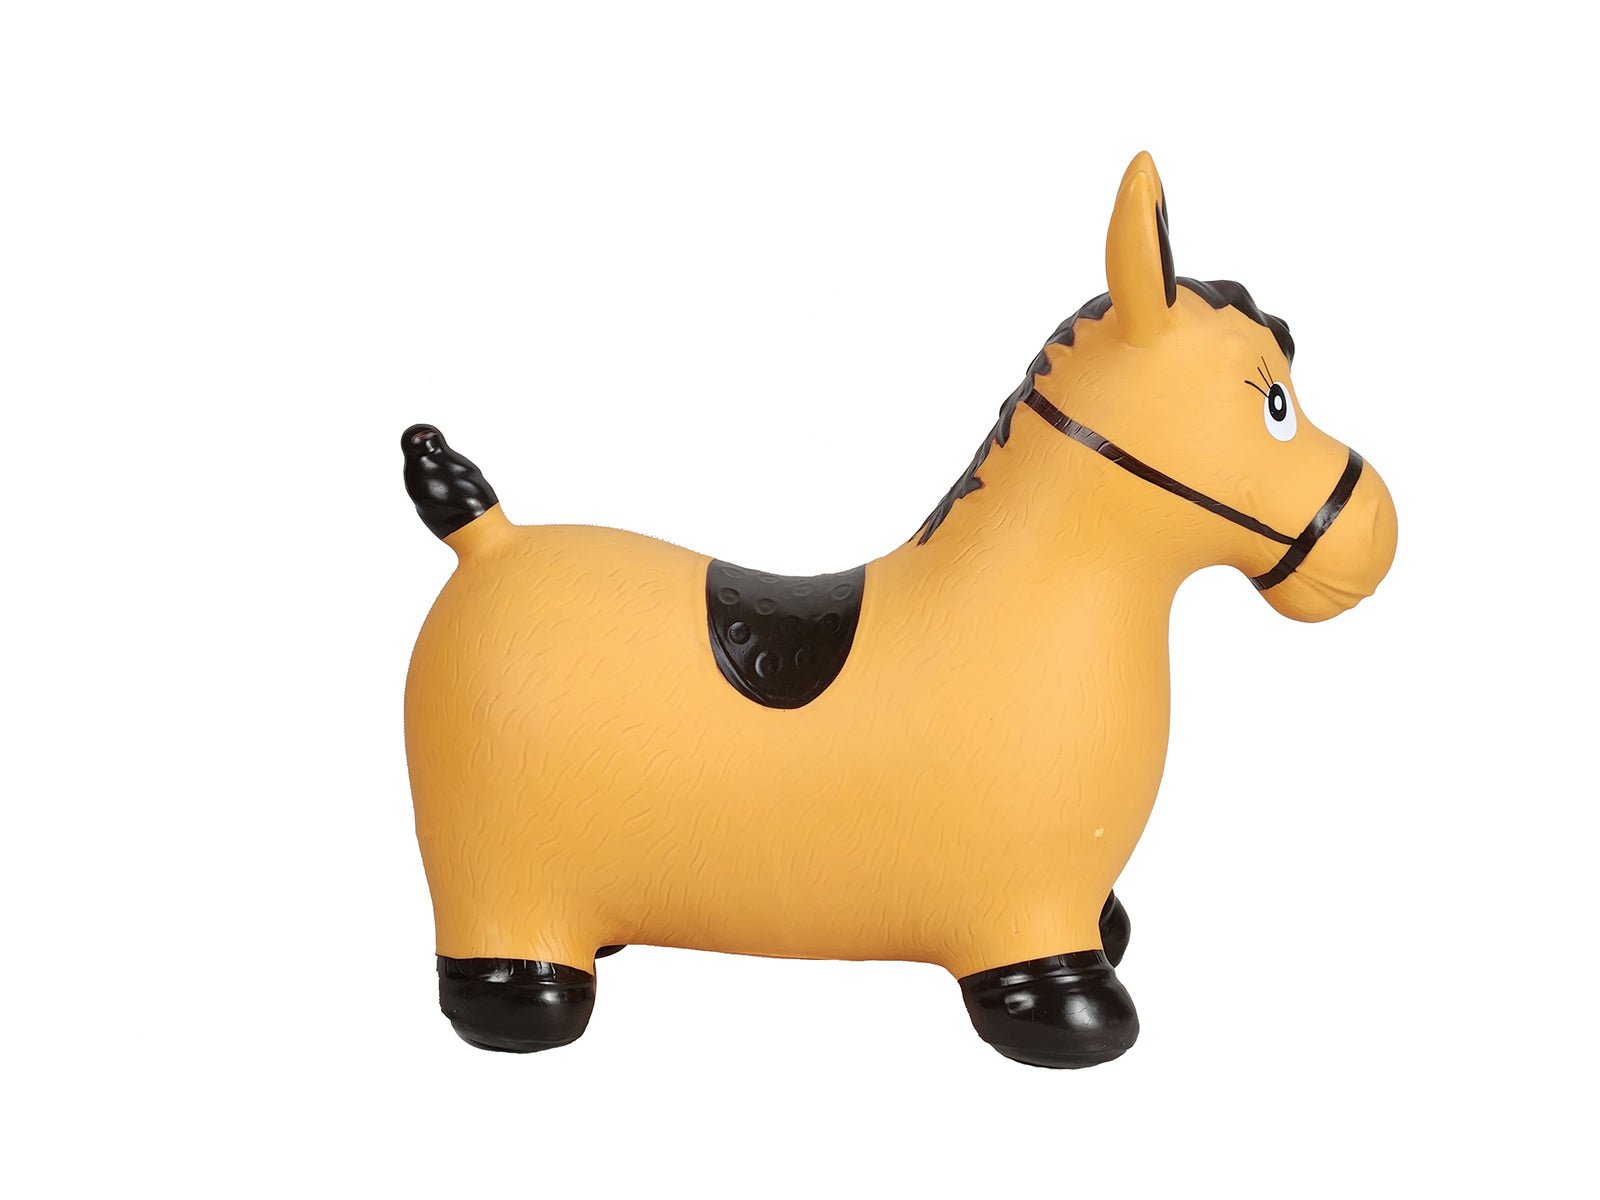 Kids Ride On Toy - Bouncy Rider Ginger The Horse